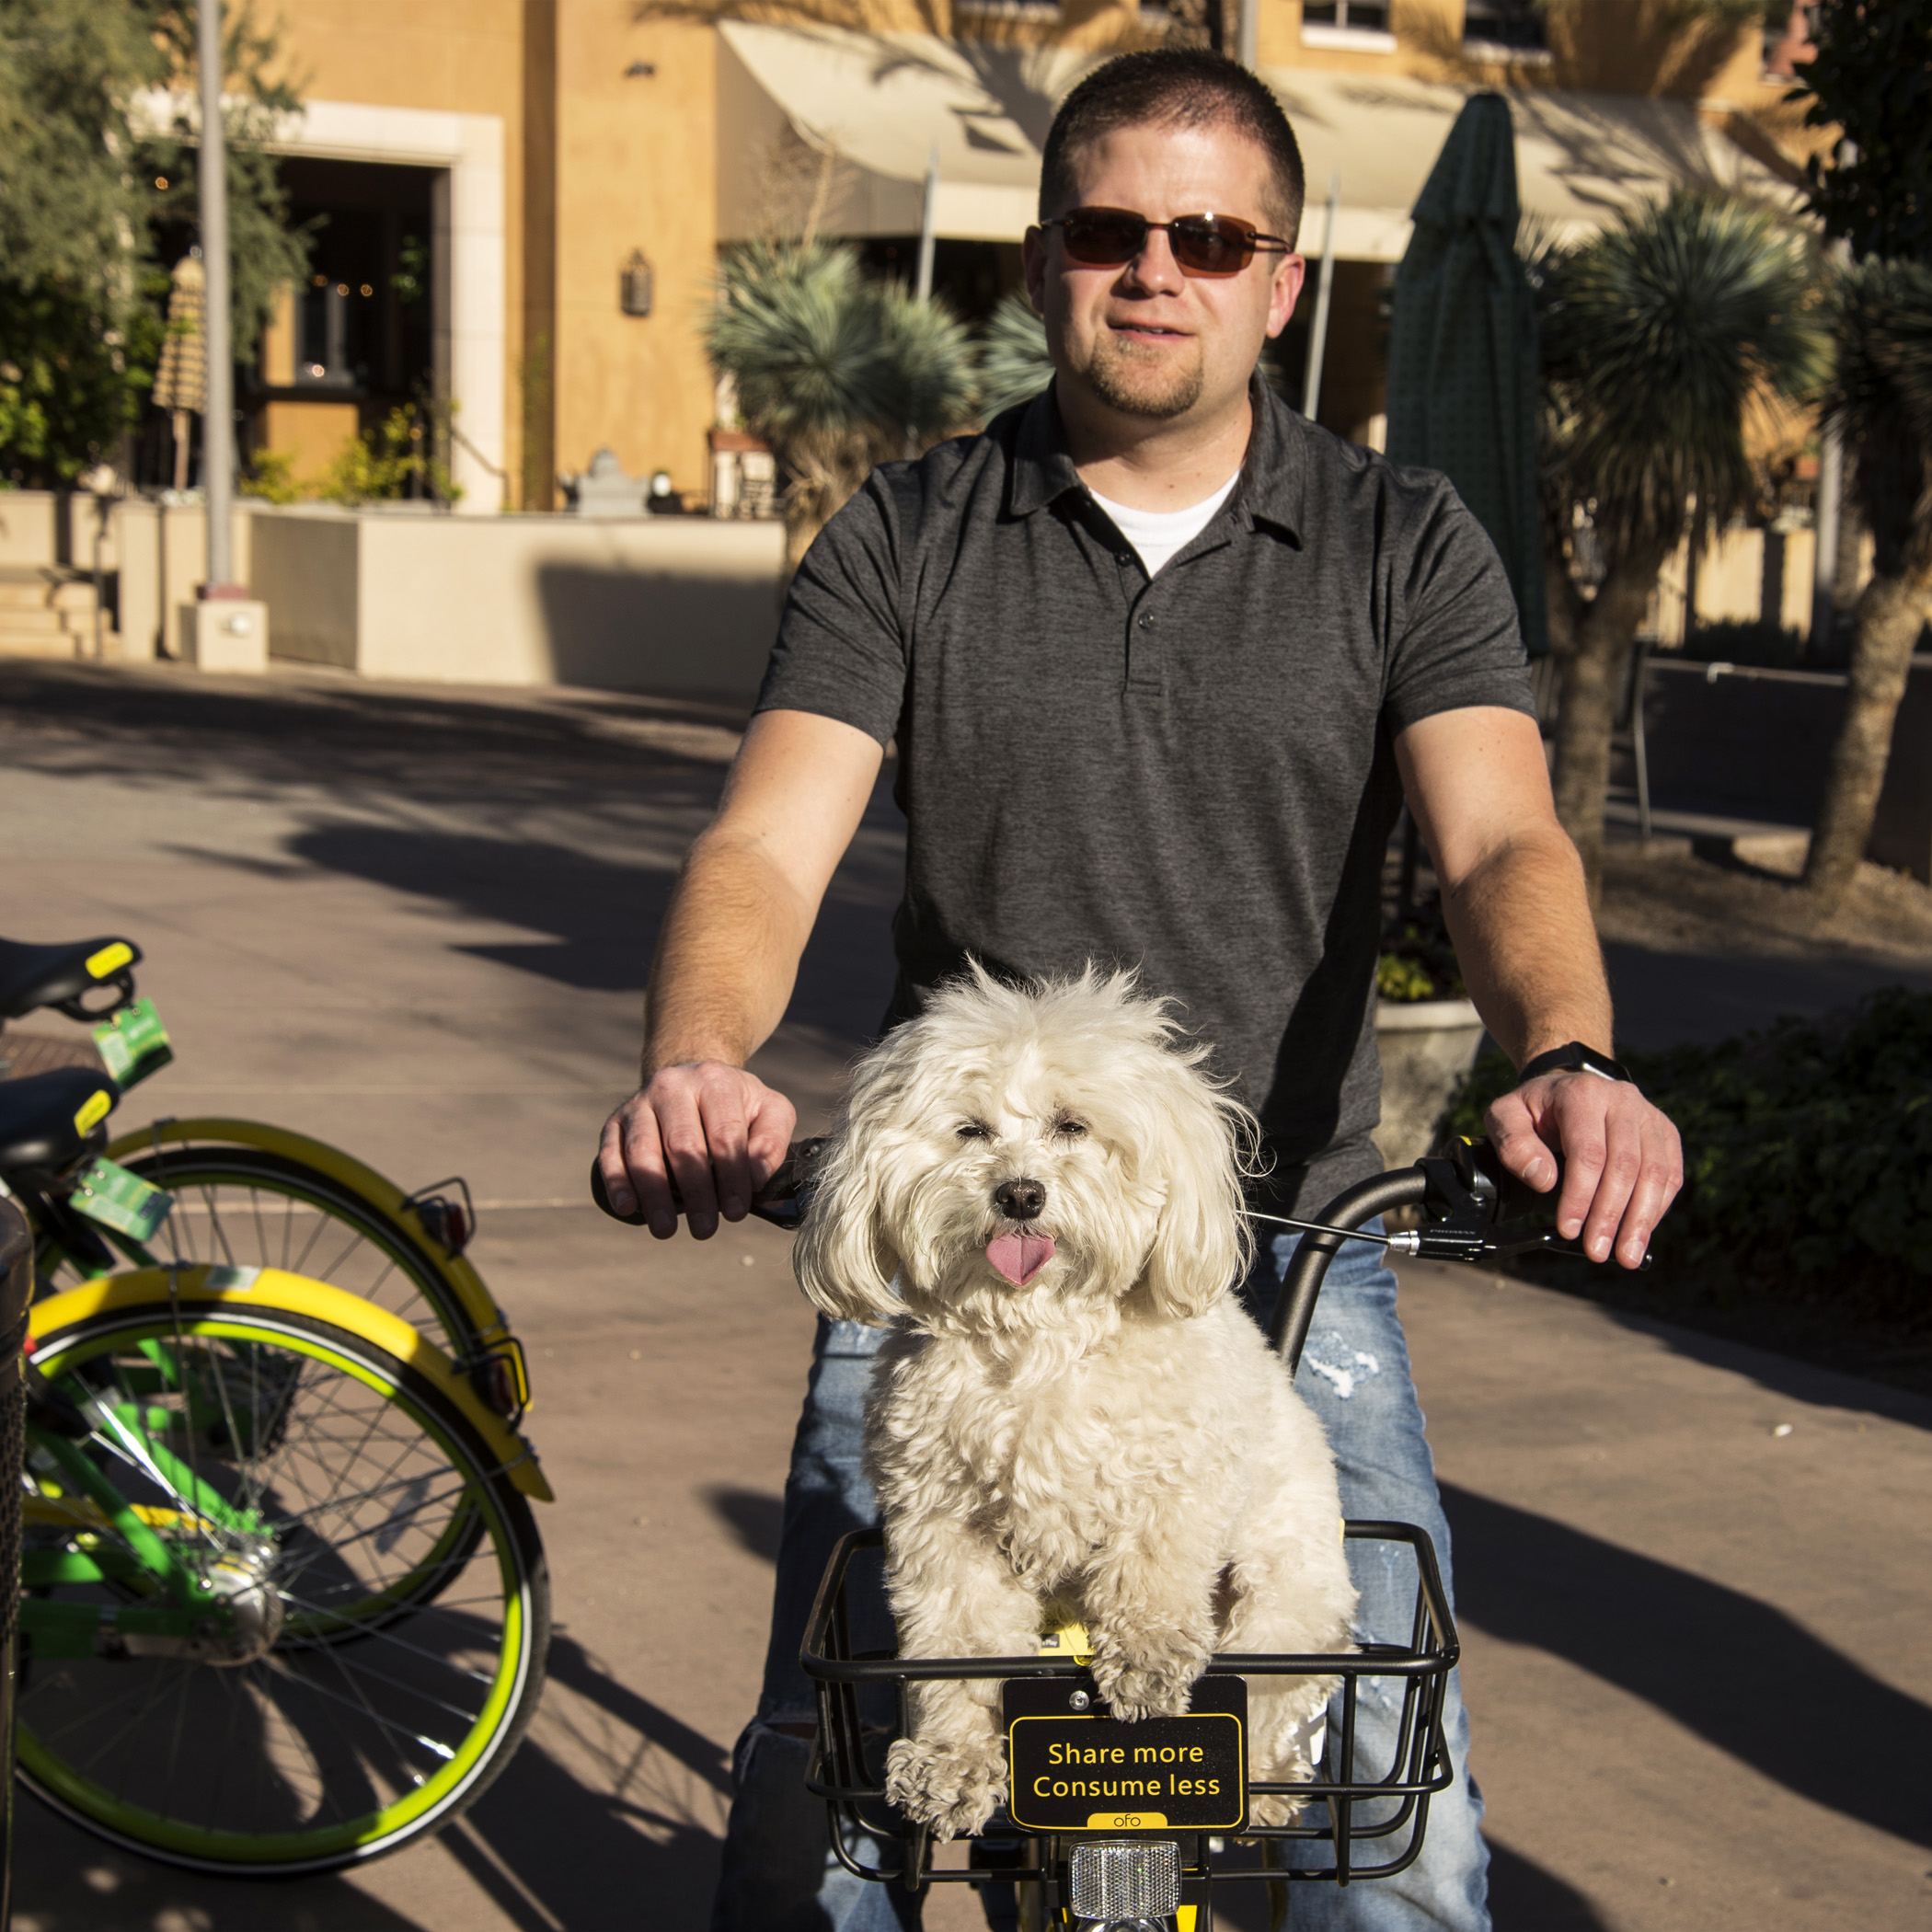  After the art show, we spent some time exploring around Downtown  Scottsdale . They had these bikes all over that you could rent and ride. Too bad the baskets weren’t more puppy friendly…it would have been a much faster way to get around.&nbsp; 